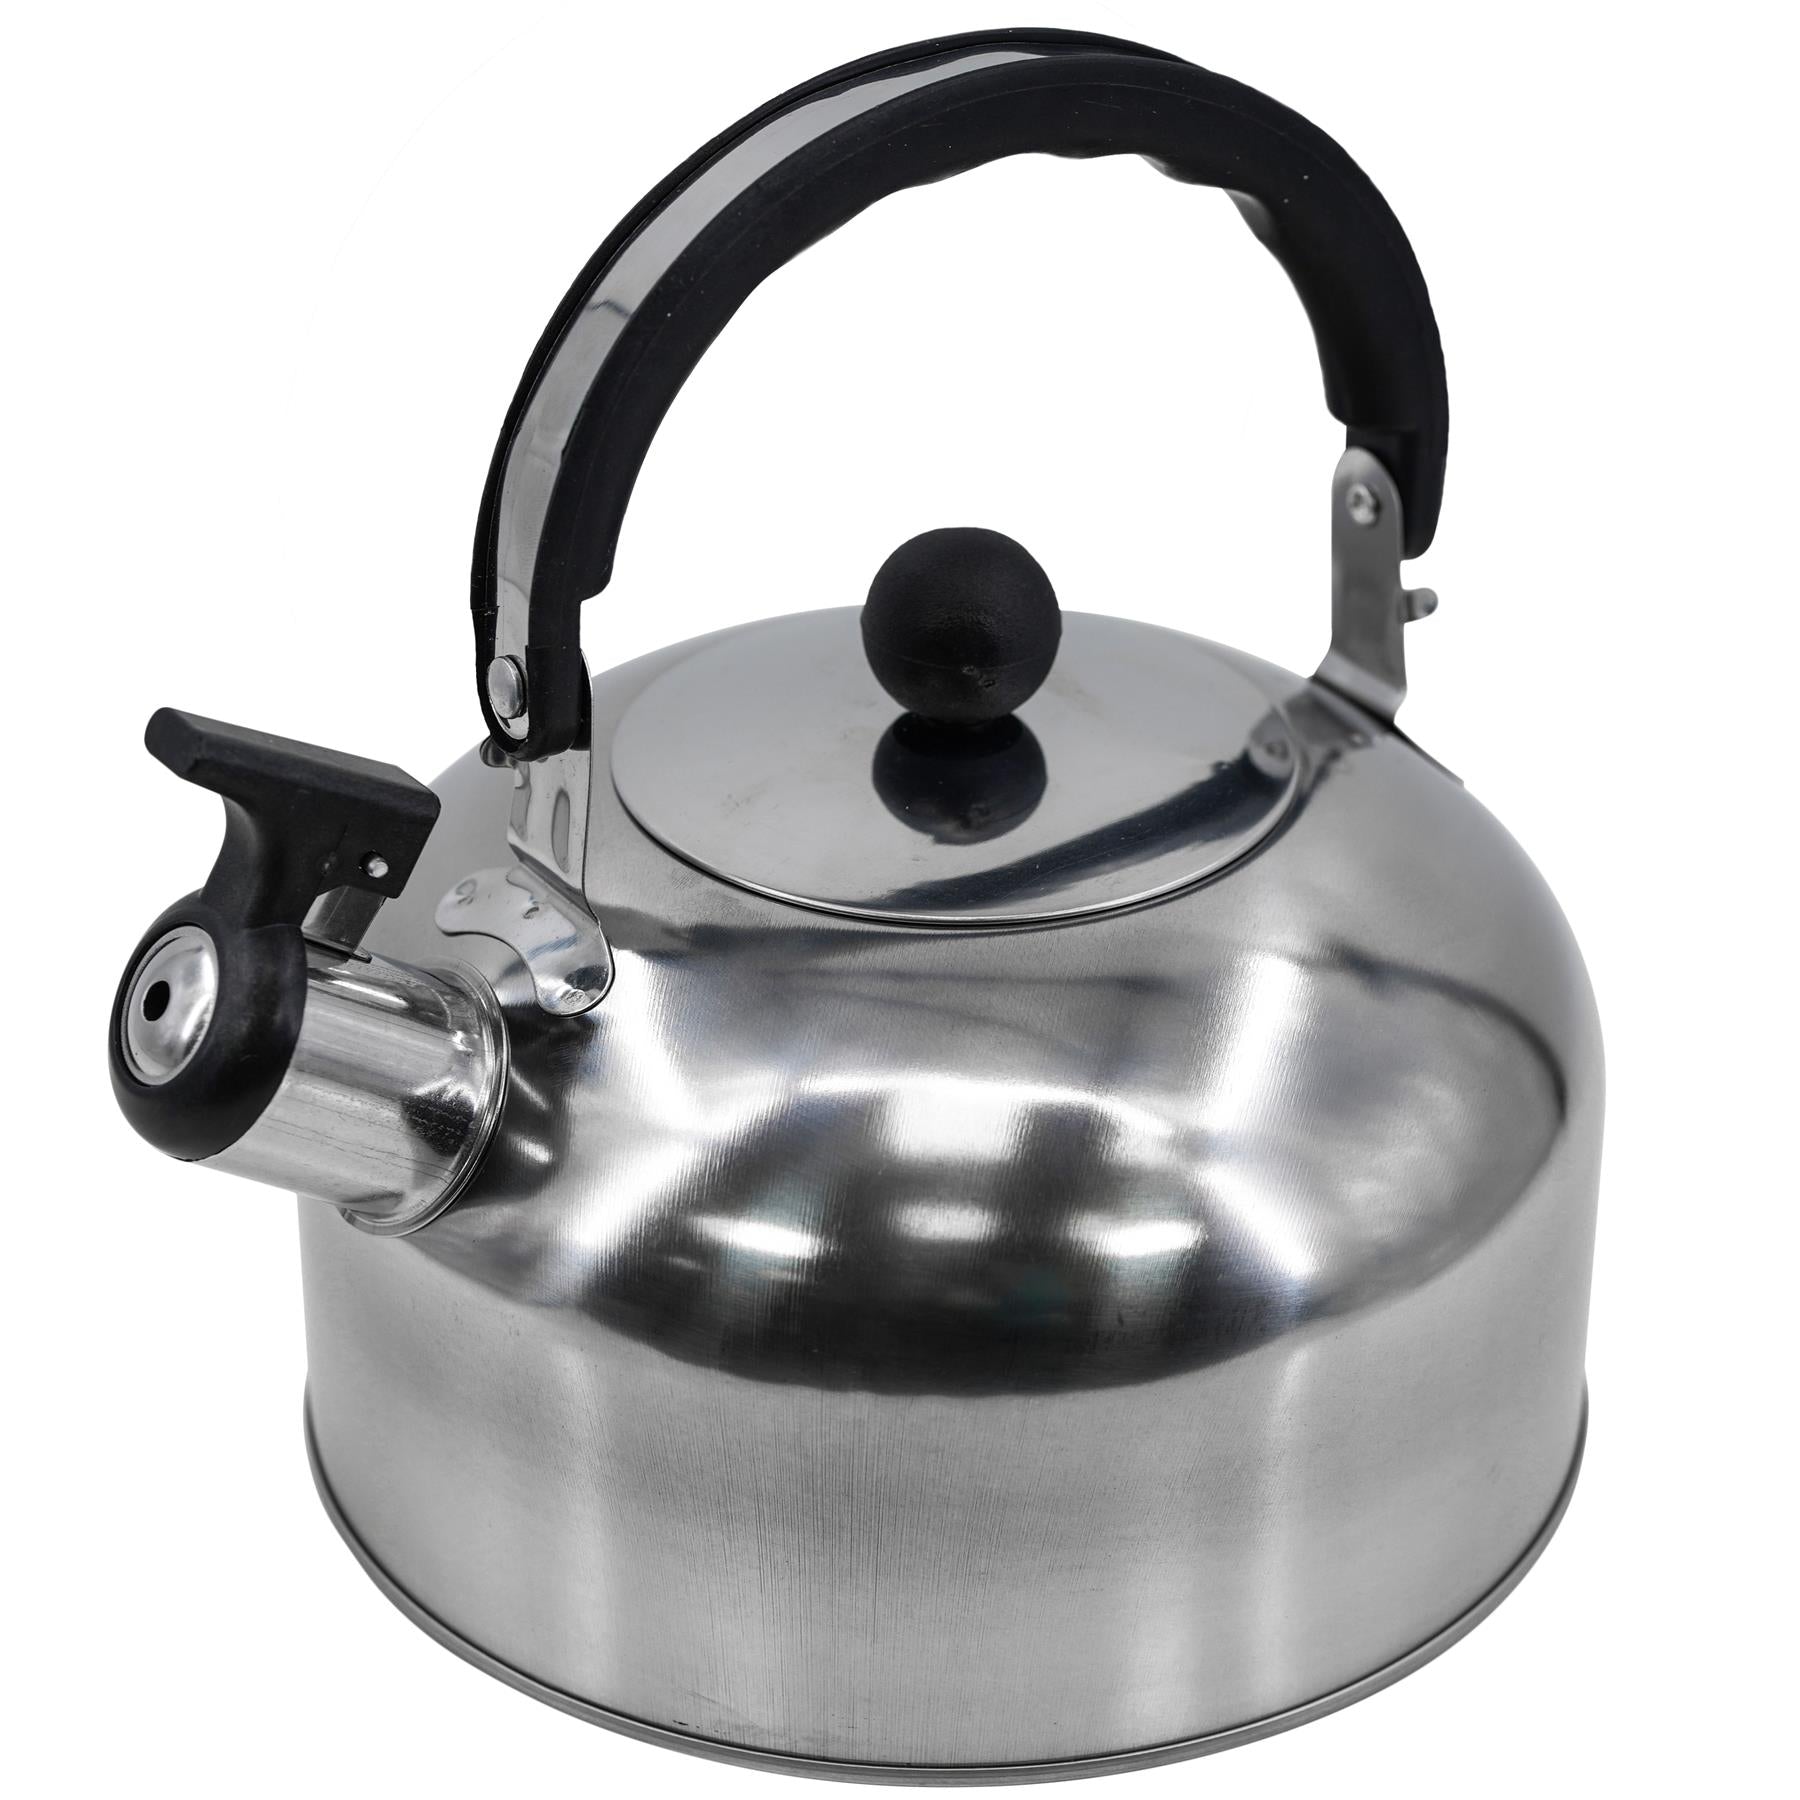 GEEZY 2.5 L Stainless Steel Whistling Camping Kettle